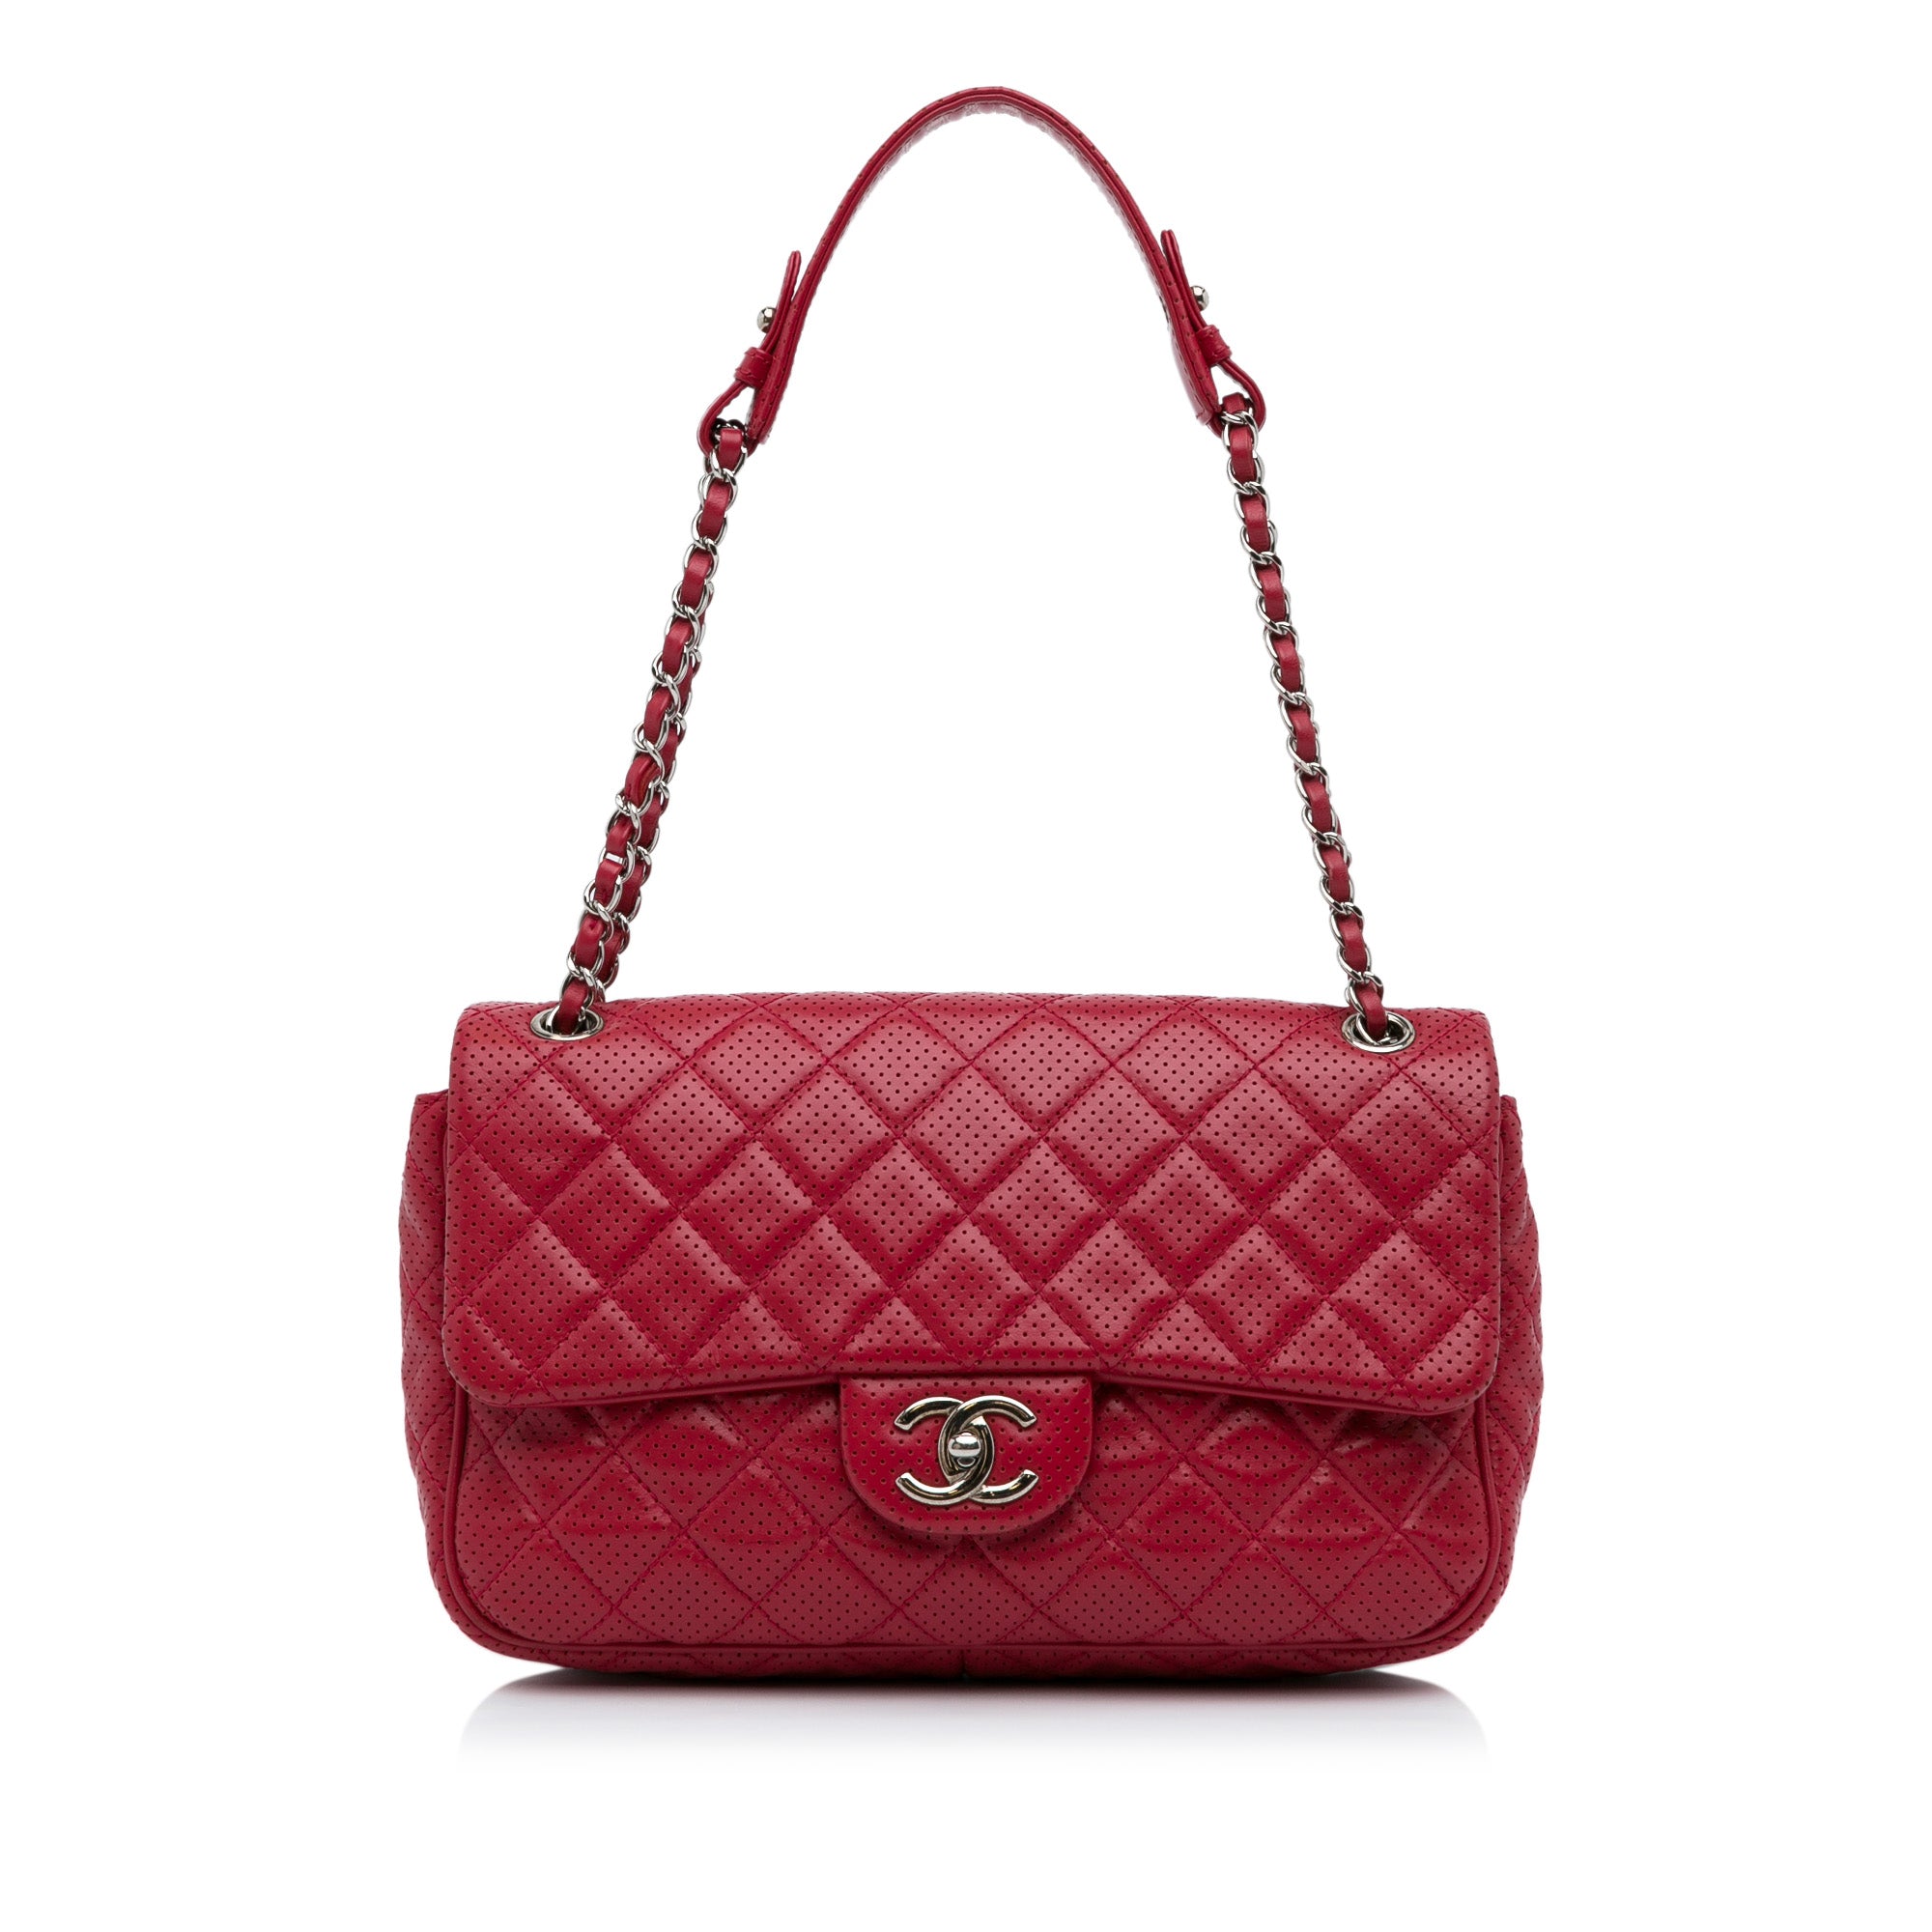 chanel red hobo bag leather